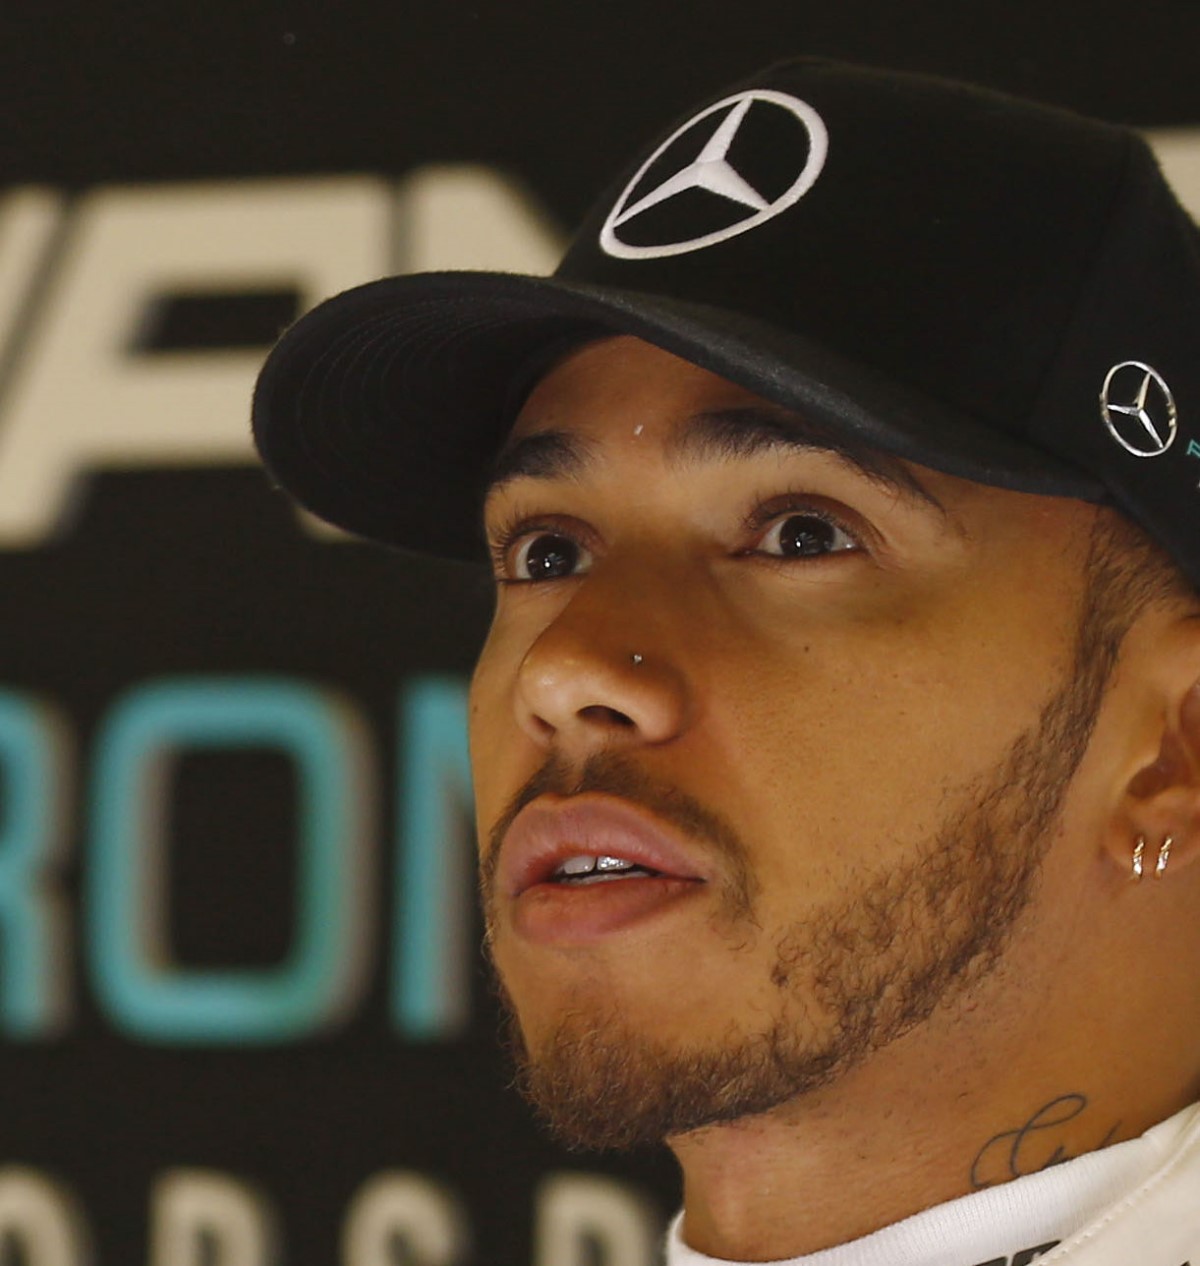 Hamilton dreams of surpassing Schumacher. He can do it as they both had Aldo Costa designed race cars